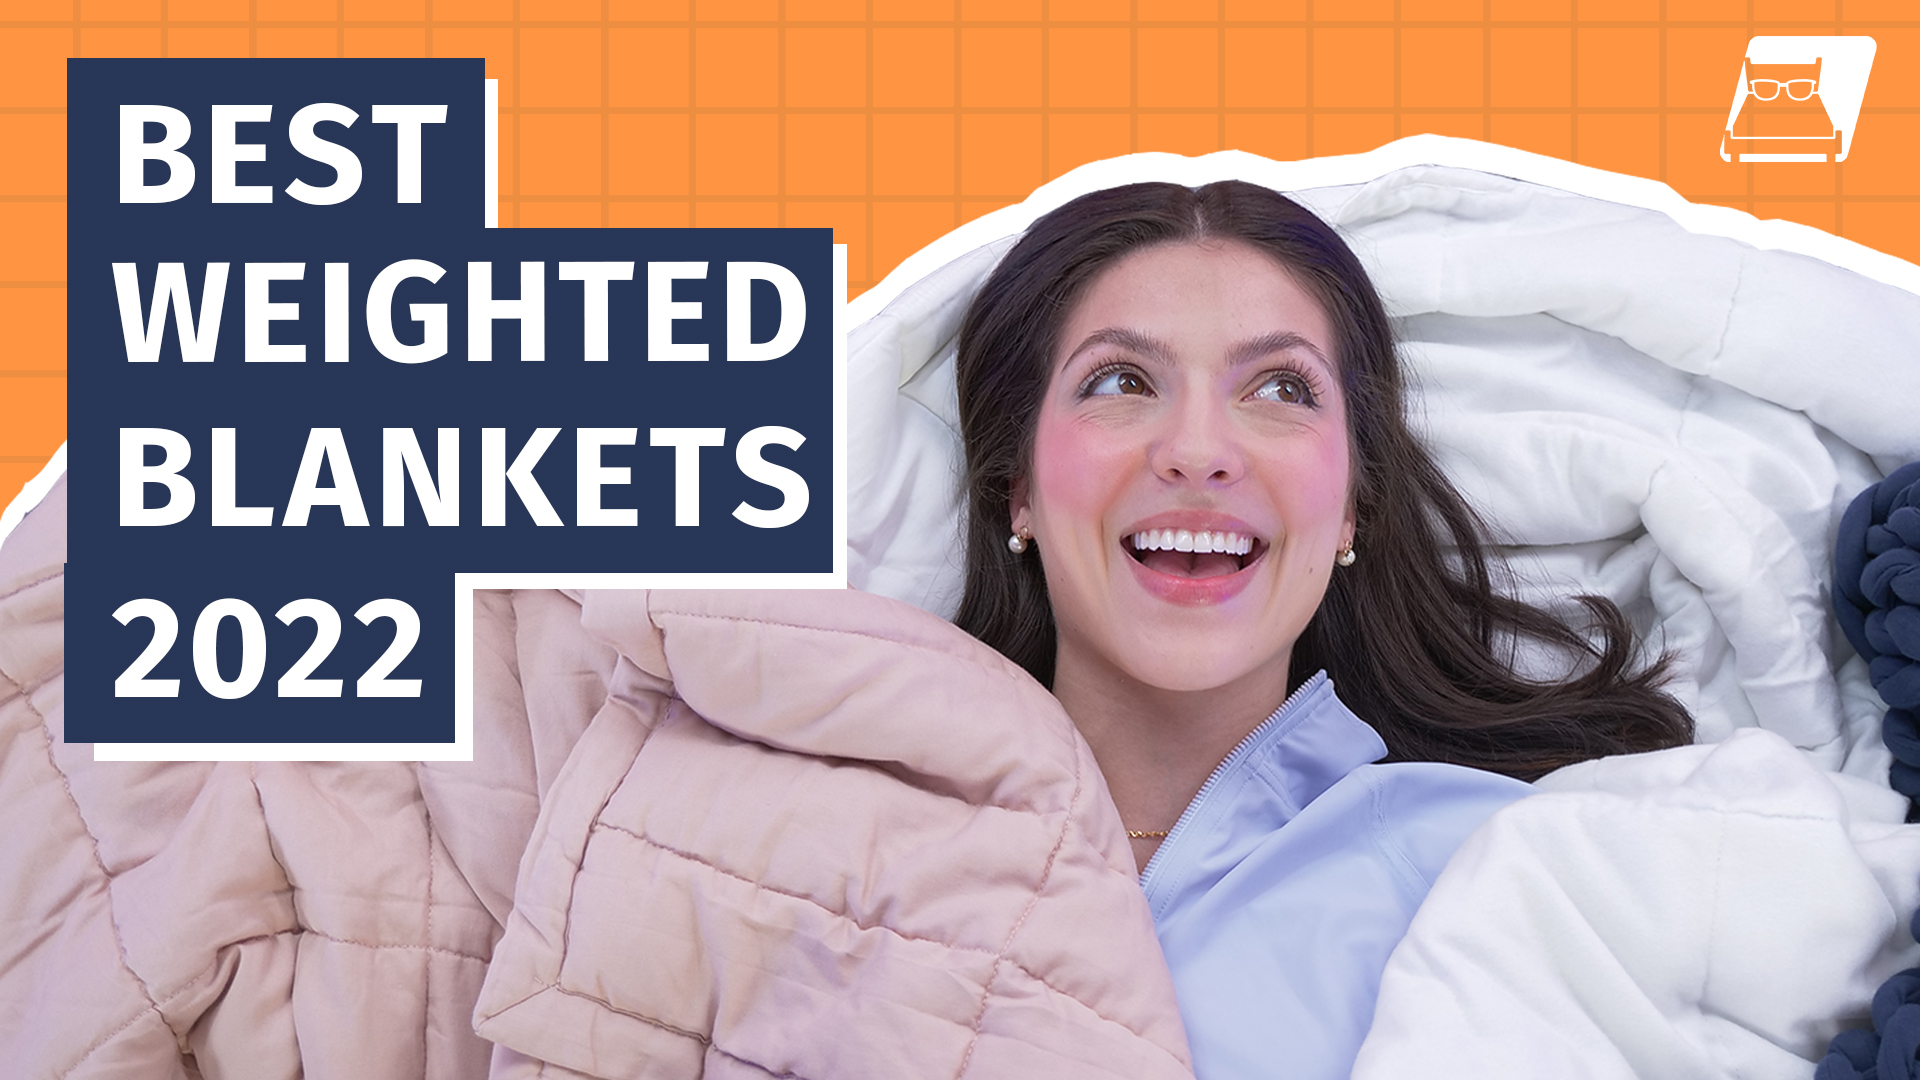 Go to Best Weighted Blankets